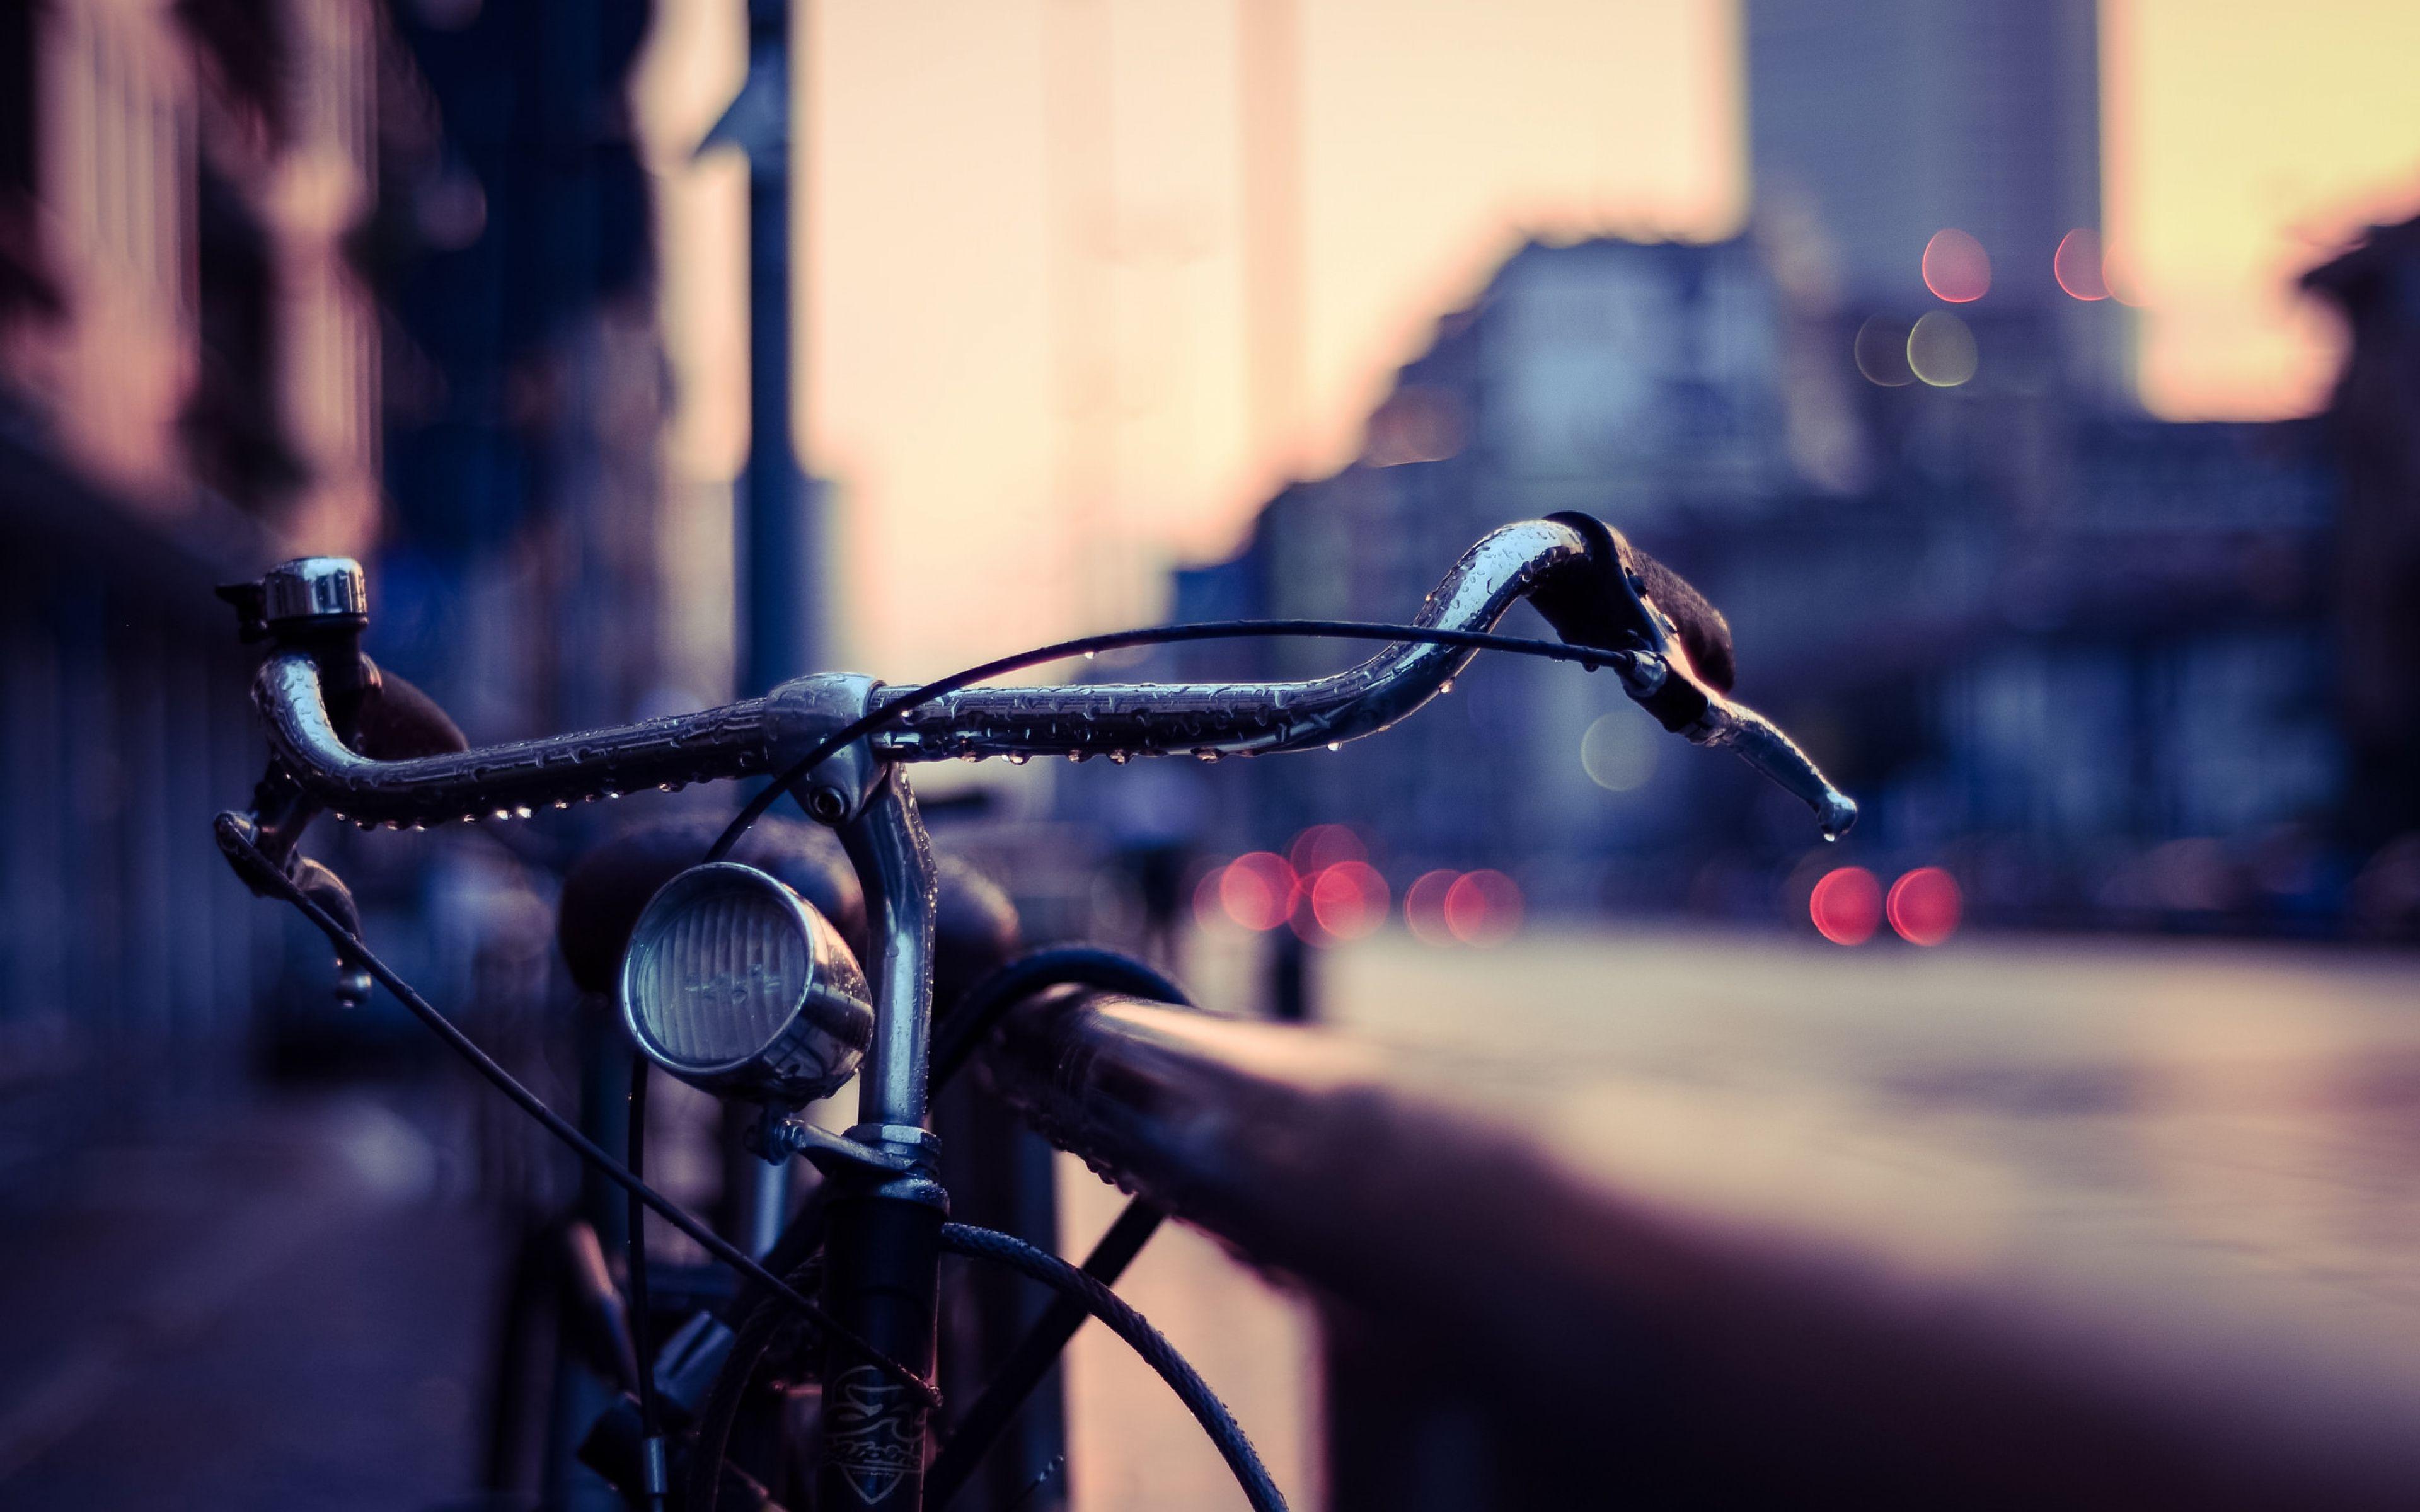 Bicycle Wallpaper Background HD 8439 3840x2400